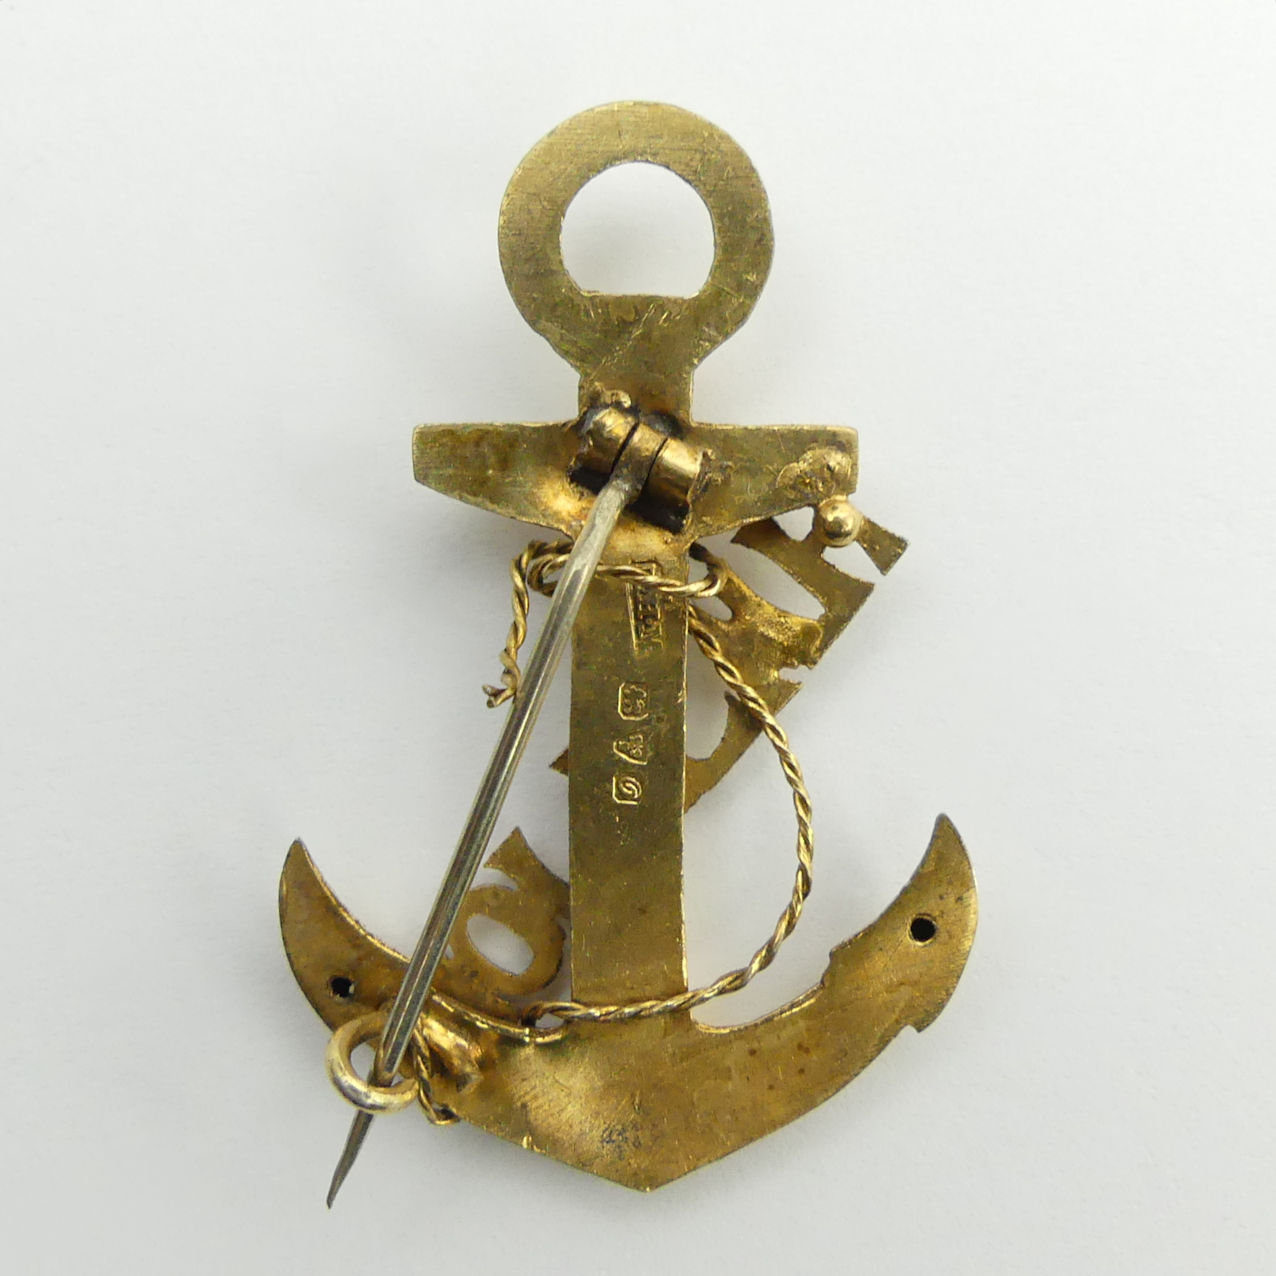 9ct gold sweetheart brooch, HMS Lion, Chester 1914, 2.5 grams, 39mm x 25mm. - Image 2 of 2